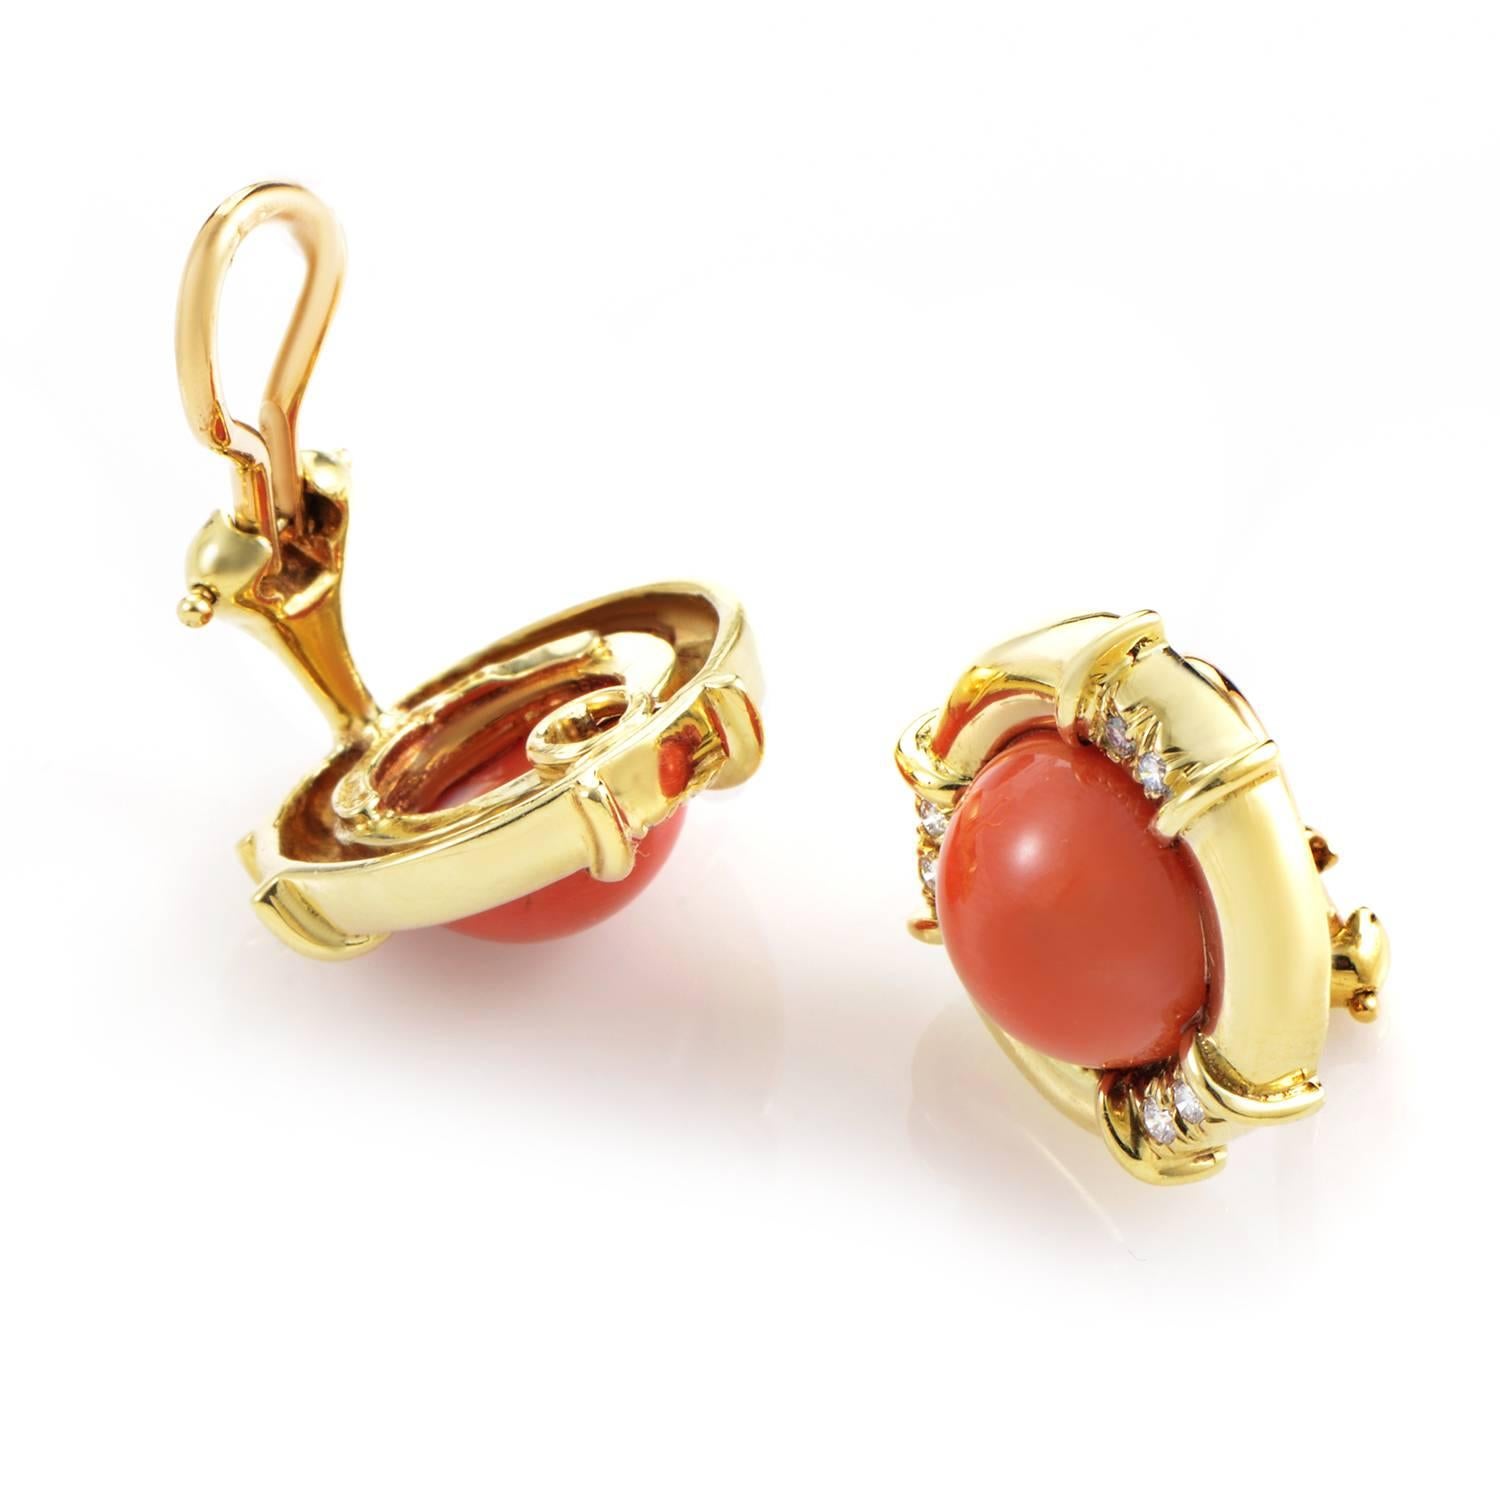 This gorgeous pair of earrings from Tiffany & Co. have a retro look that is very eye-catching. The earrings are made of 18K yellow gold and are set with diamonds. However, the earrings' main attraction are round coral stones that bring a fresh pop